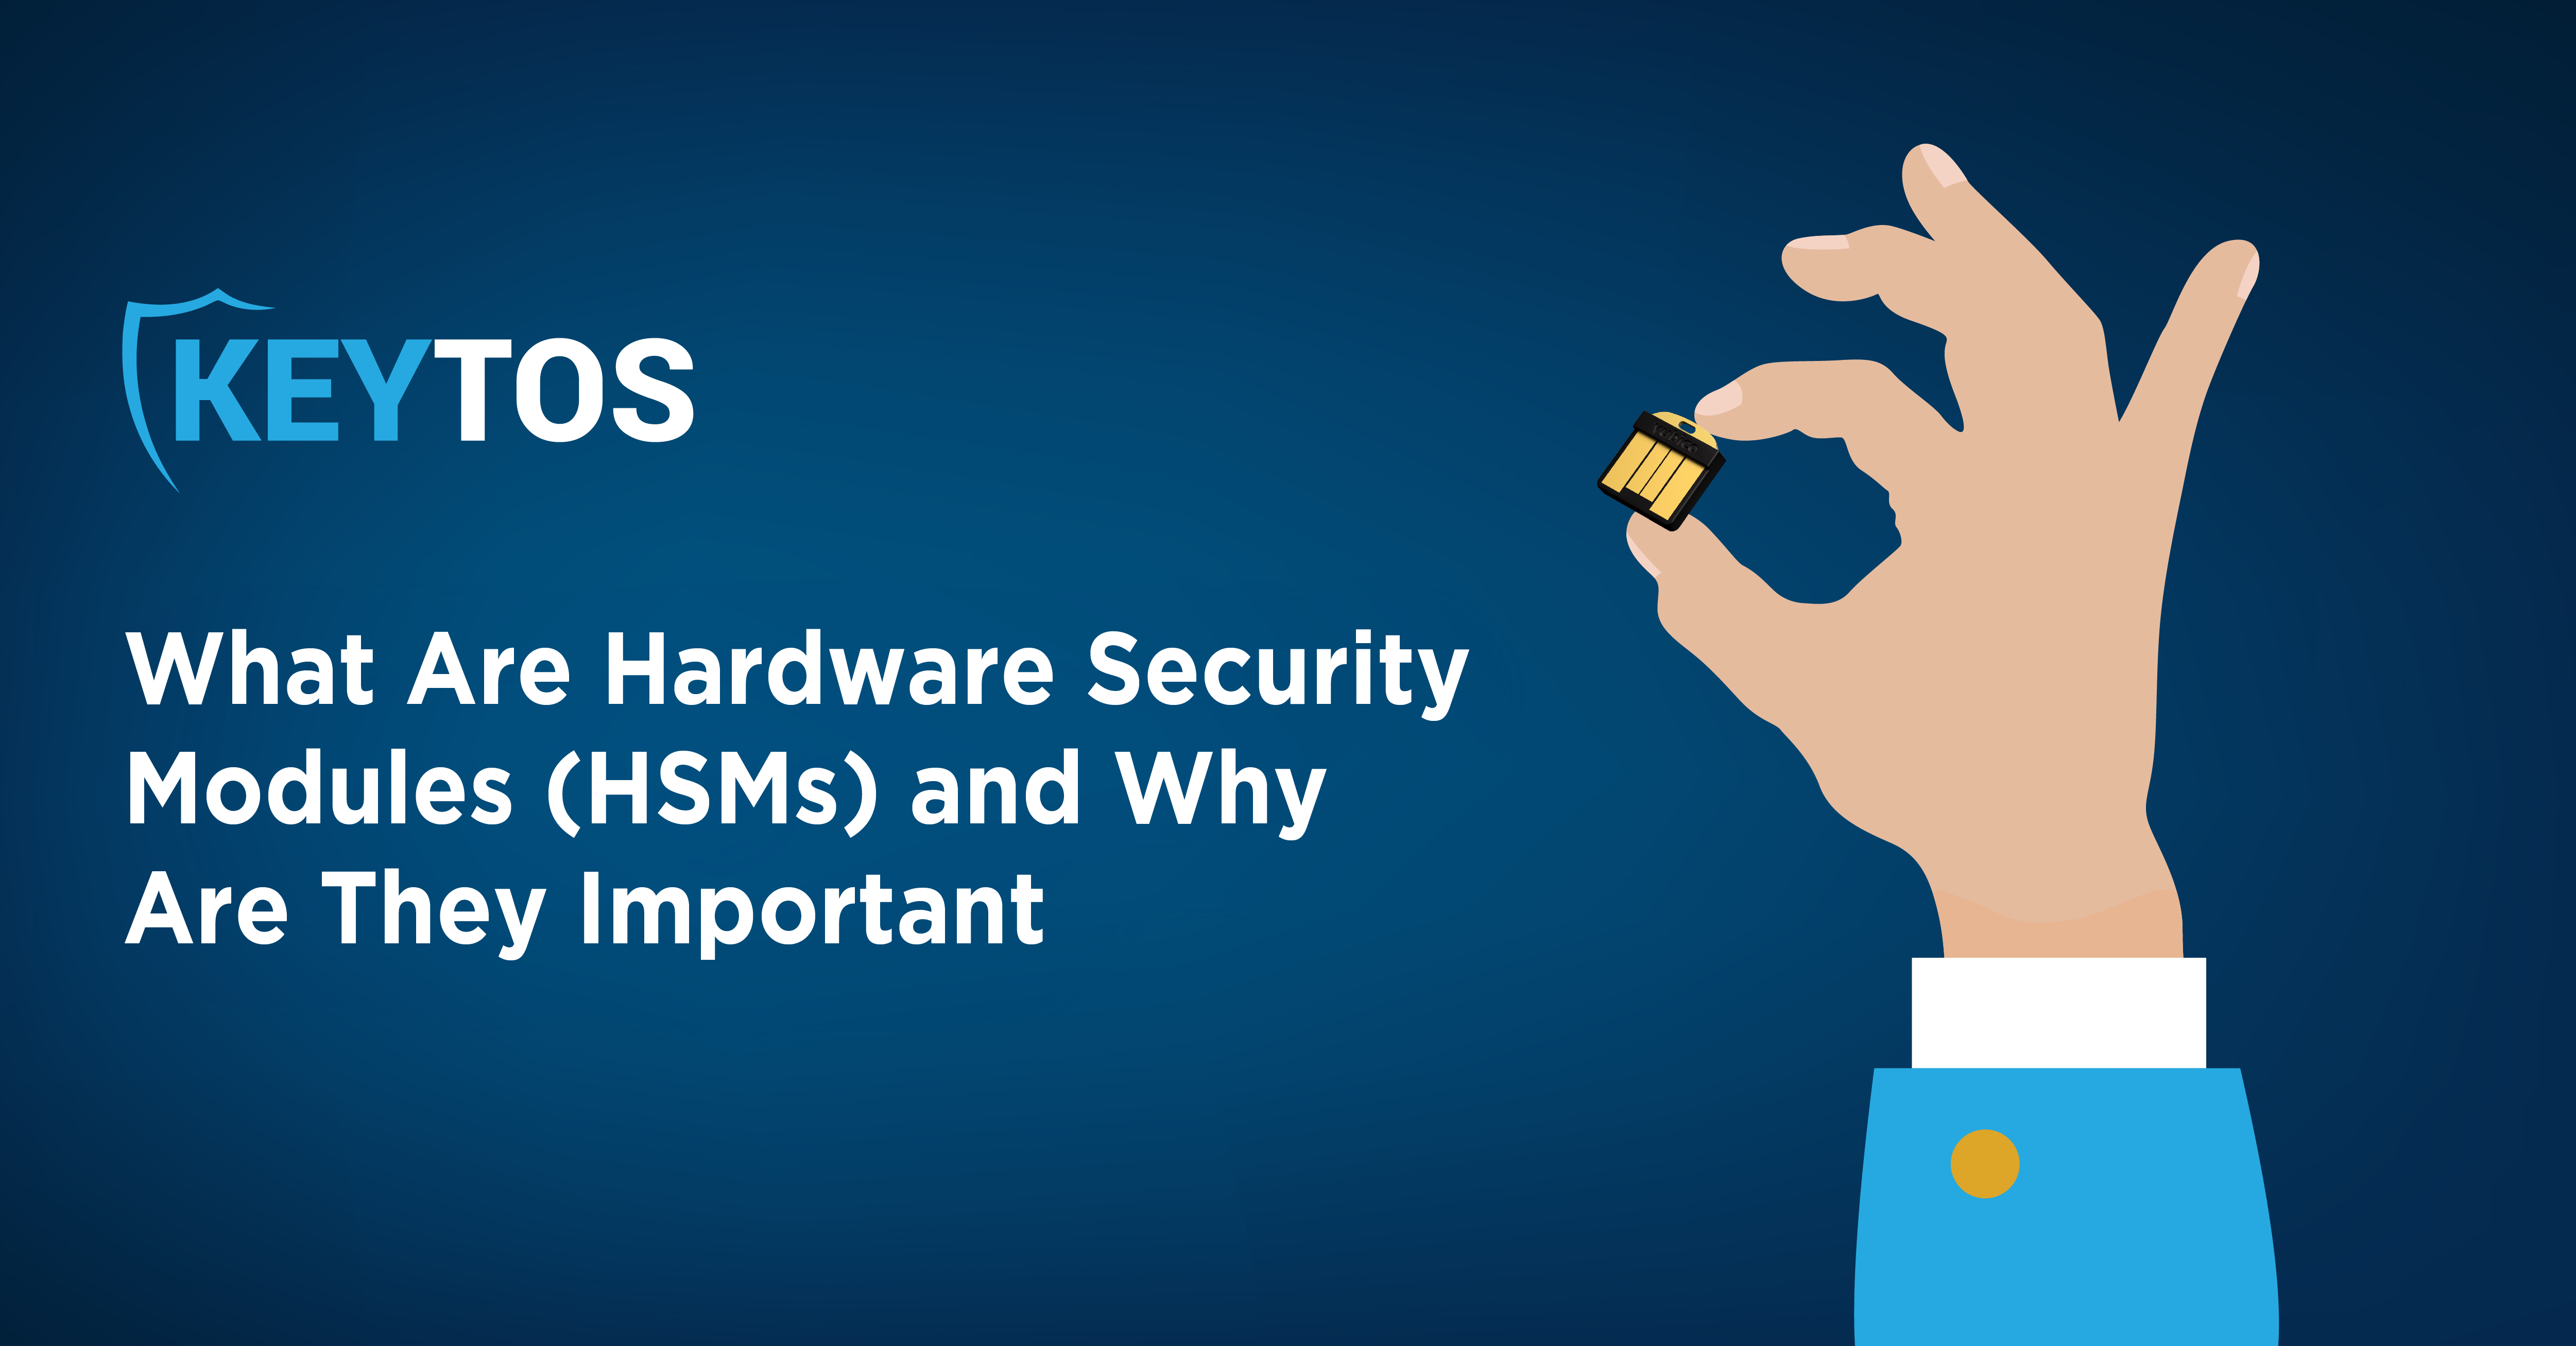 What are Hardware Security Modules (HSMs)? Why are HSMs Important?